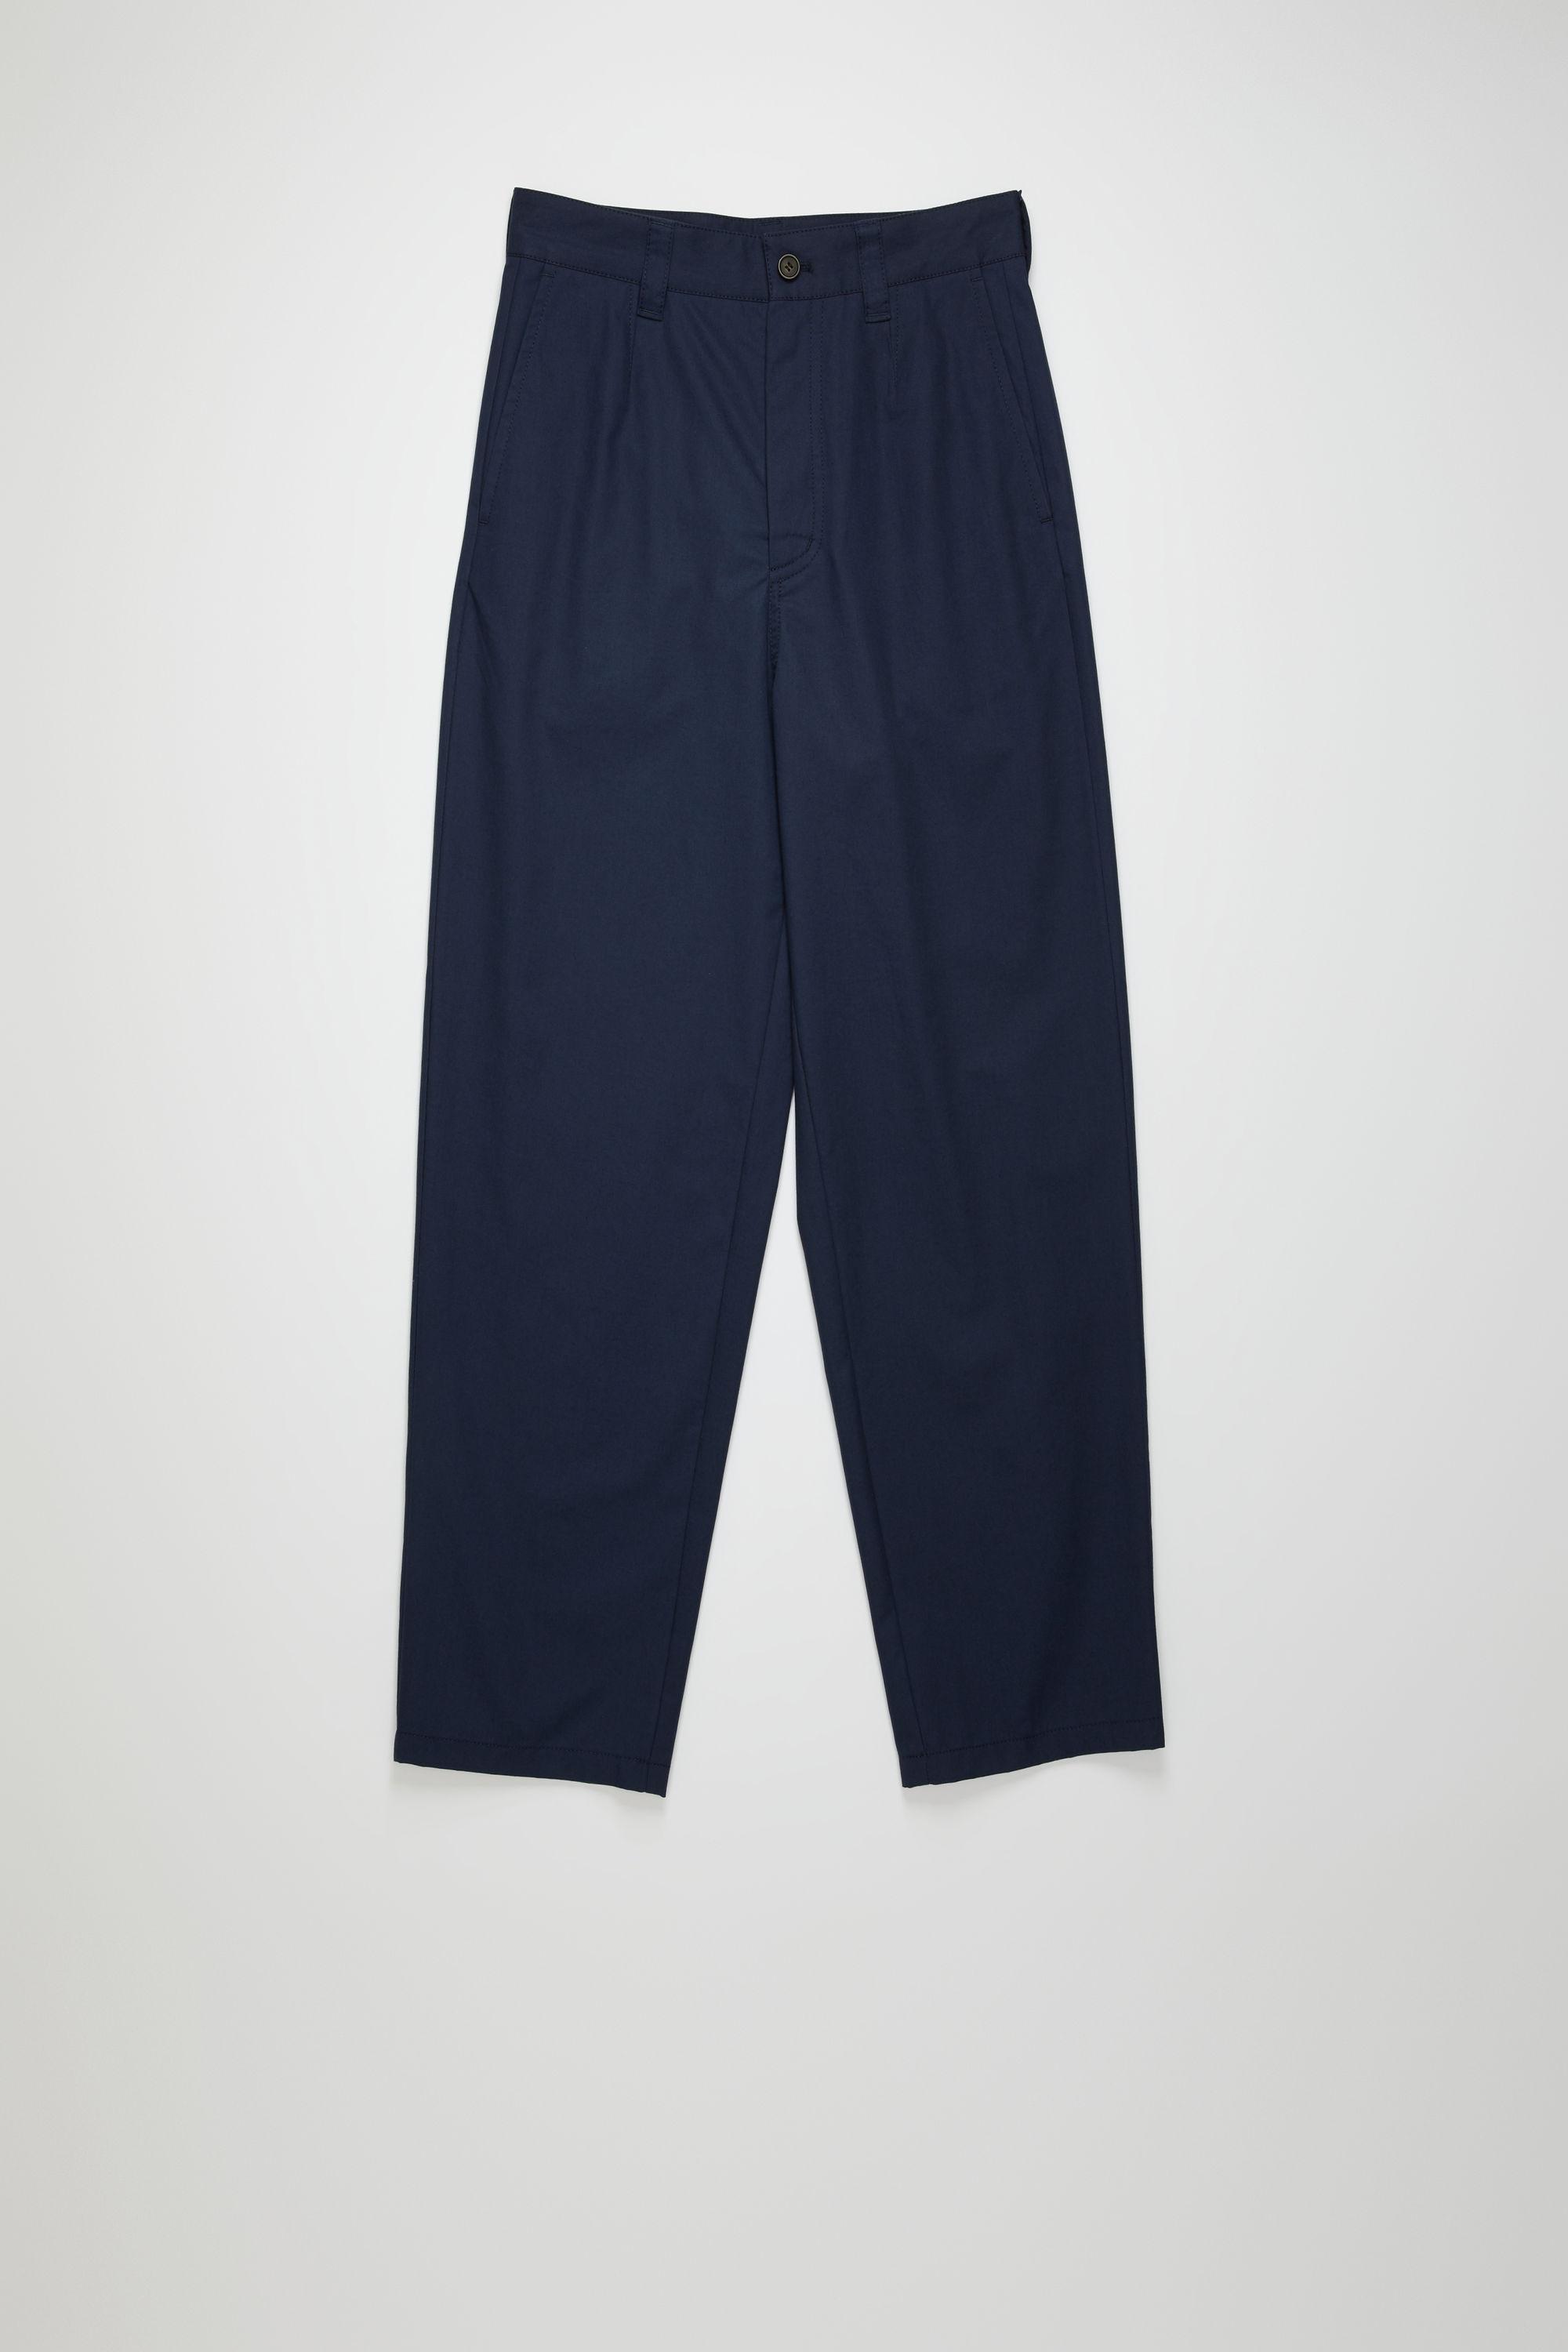 Acne Studios Fn-mn-trou000237 Dark Blue Tapered Fit Cotton Chinos 